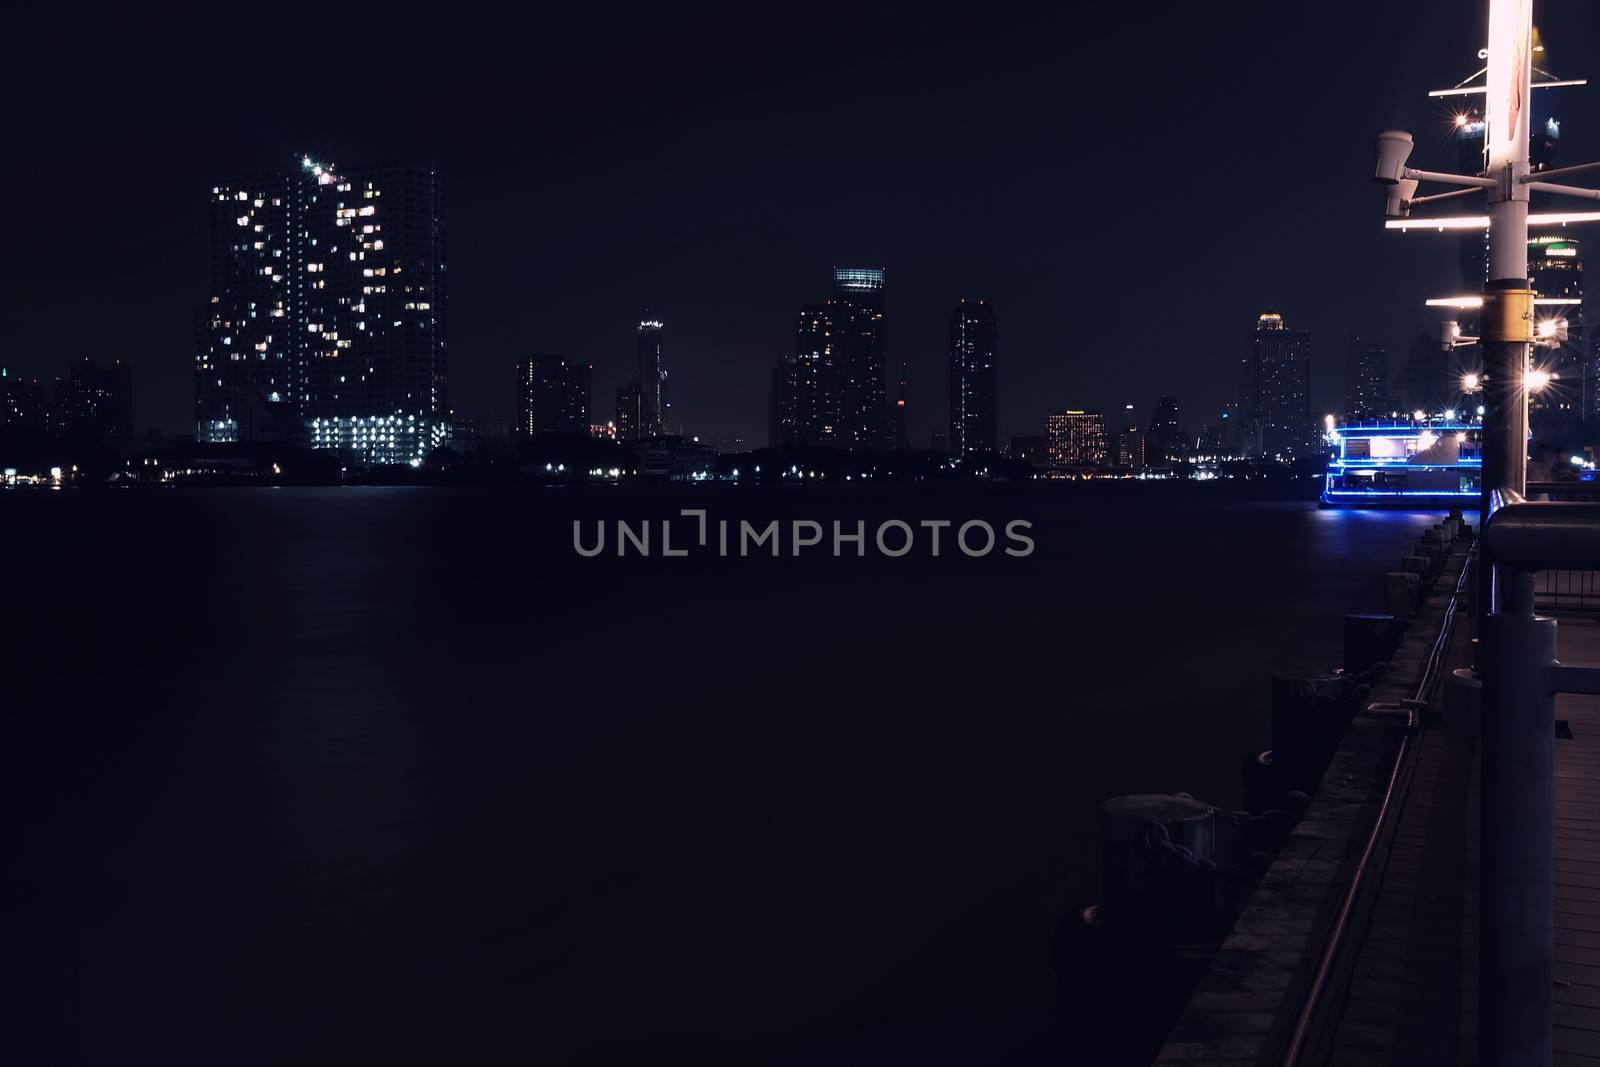 Scenery of NIght at Chaophraya River at Asiatique Market Pier. Chaophraya River is the major river in Bangkok, Thailand. by mesamong